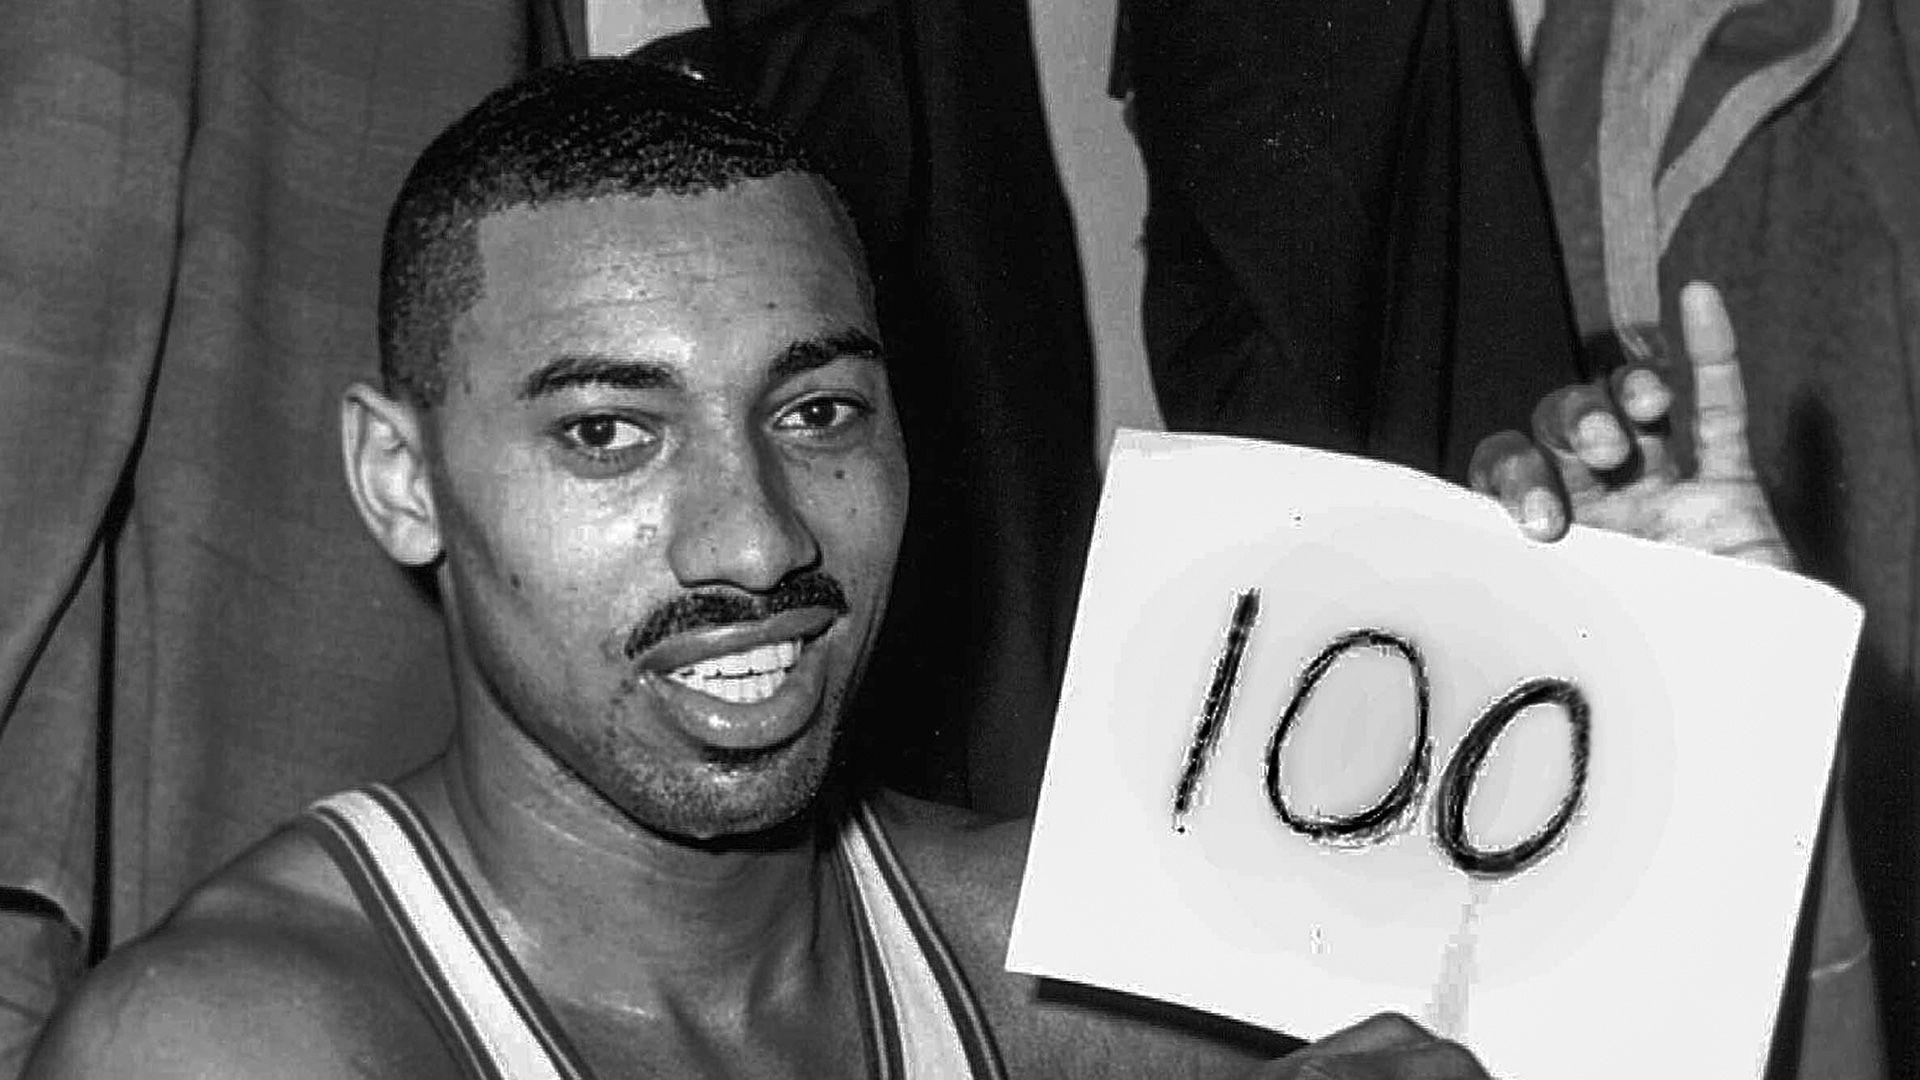 Wilt Chamberlain in photo: Classic image of 'The Big Dipper